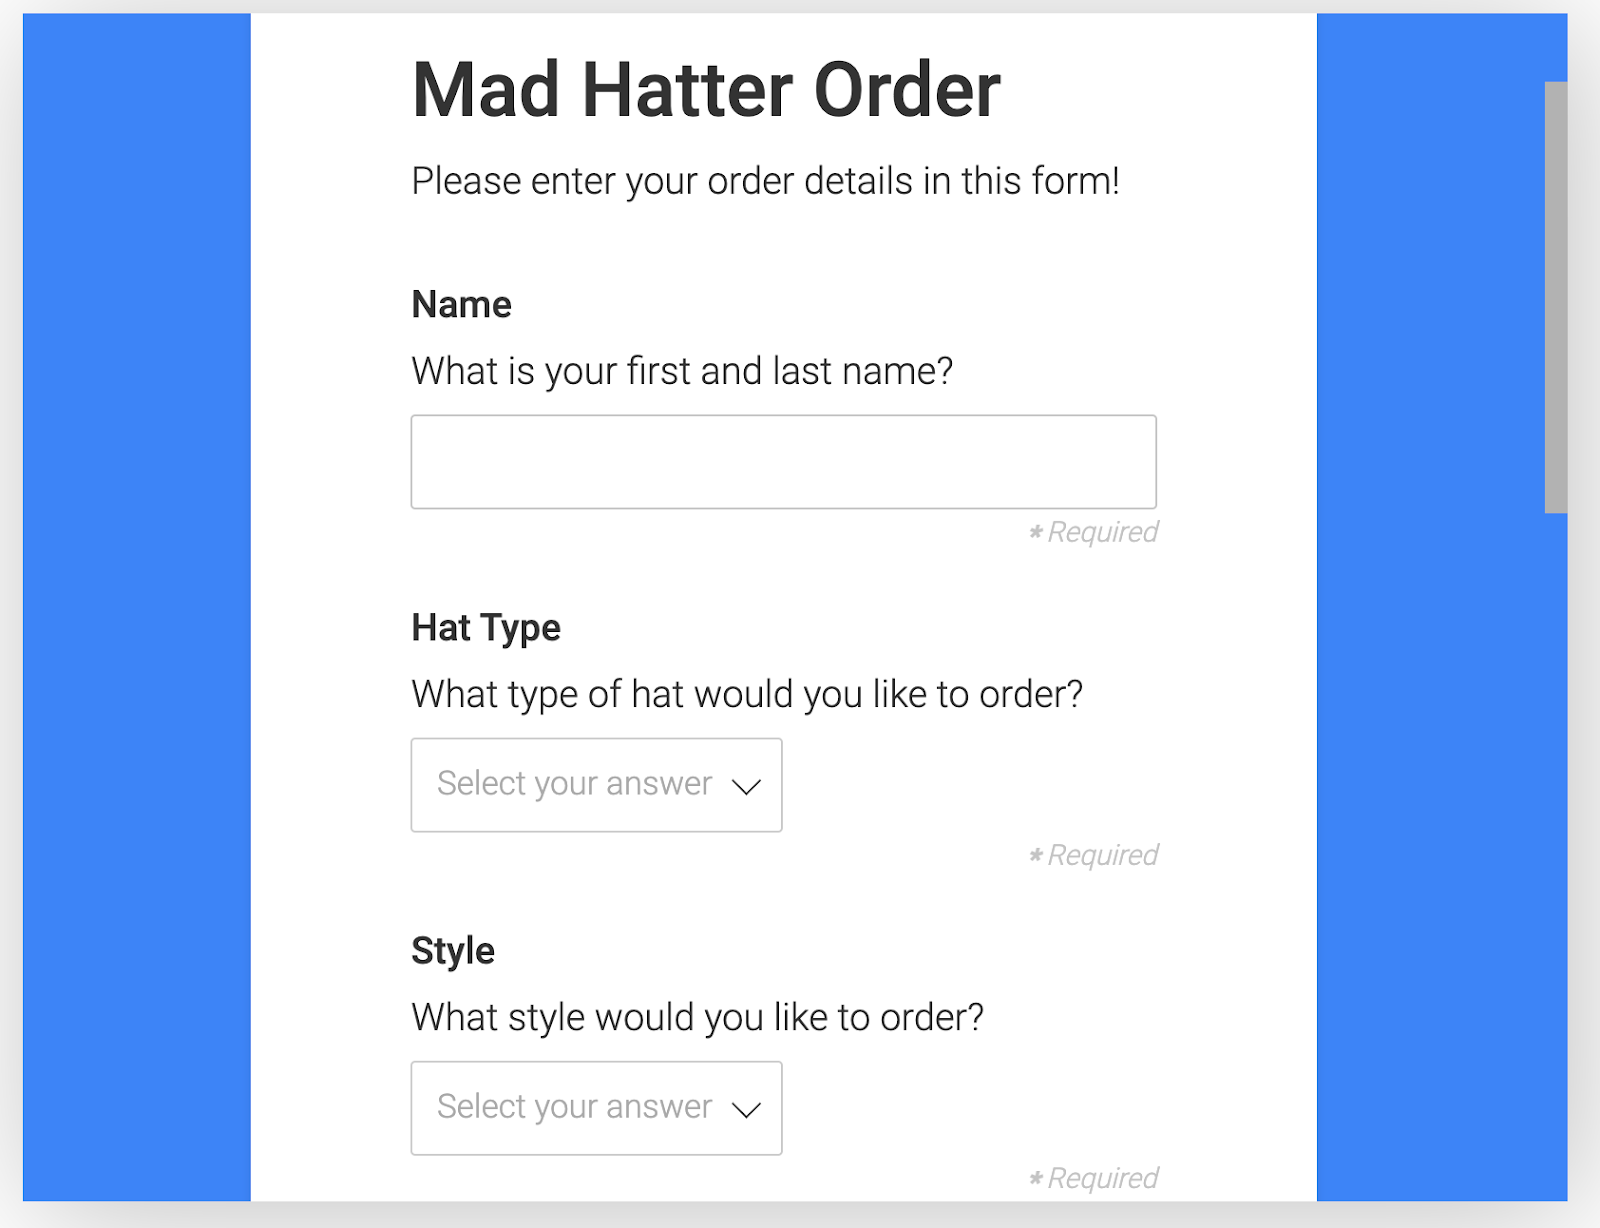 Order forms make it easy to capture customer order information so your team can focus on fulfilling orders.